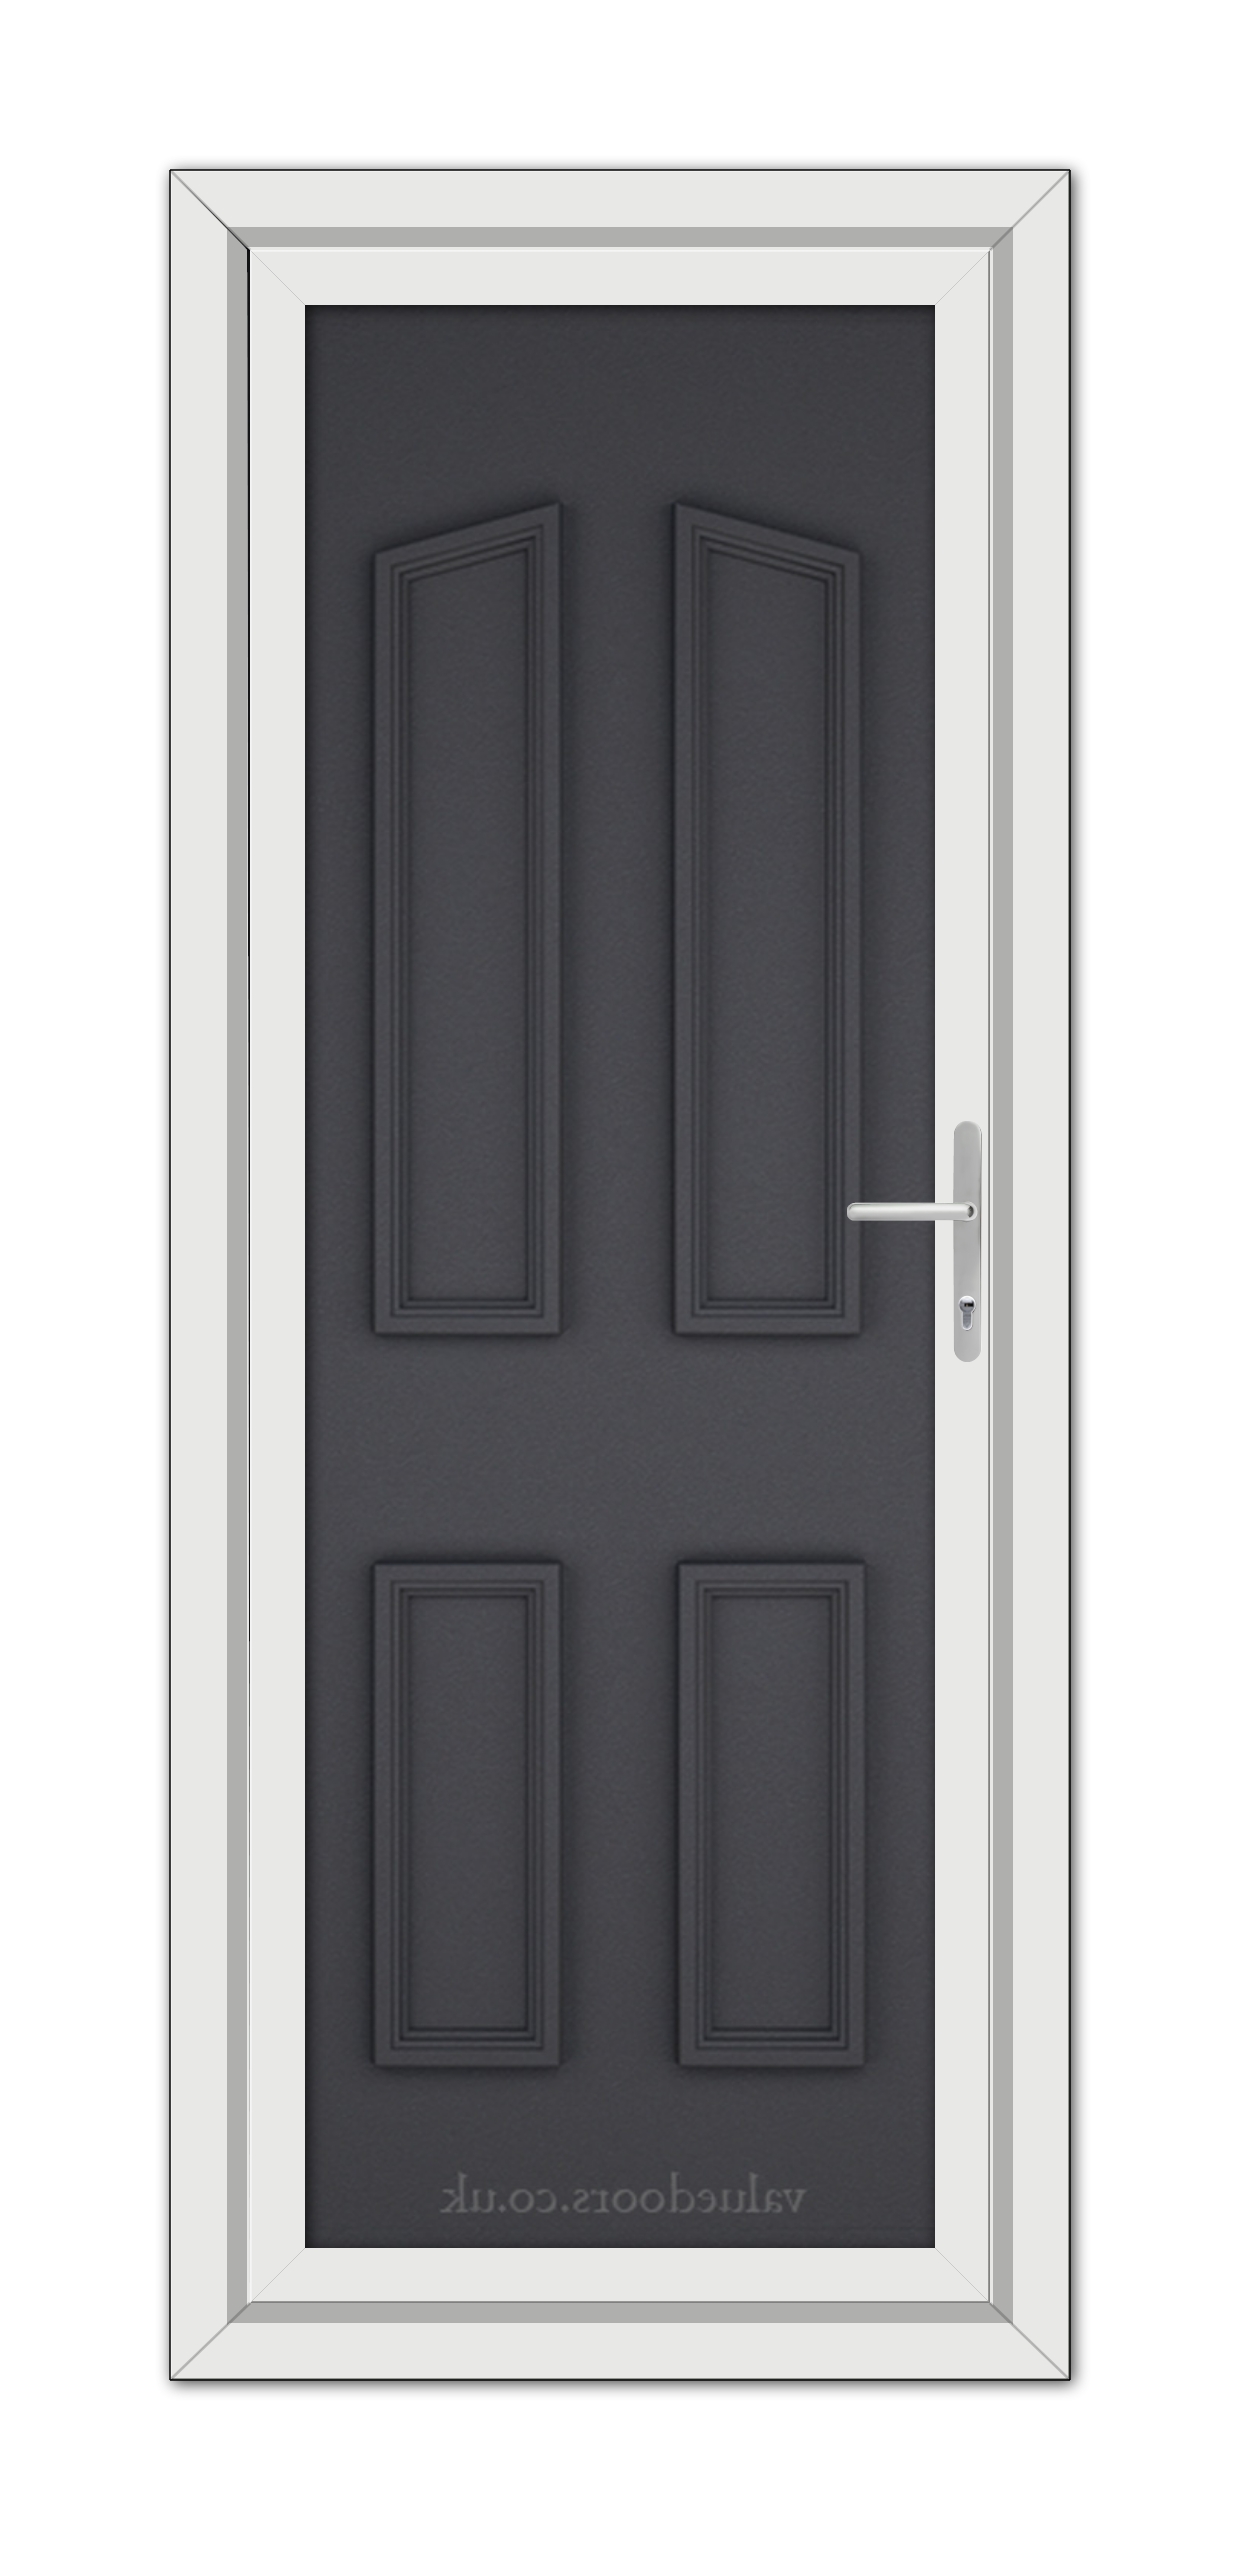 A modern Grey Grained Kensington Solid uPVC door with a metallic handle, featuring a simple rectangular design with four panels, set within a white door frame.